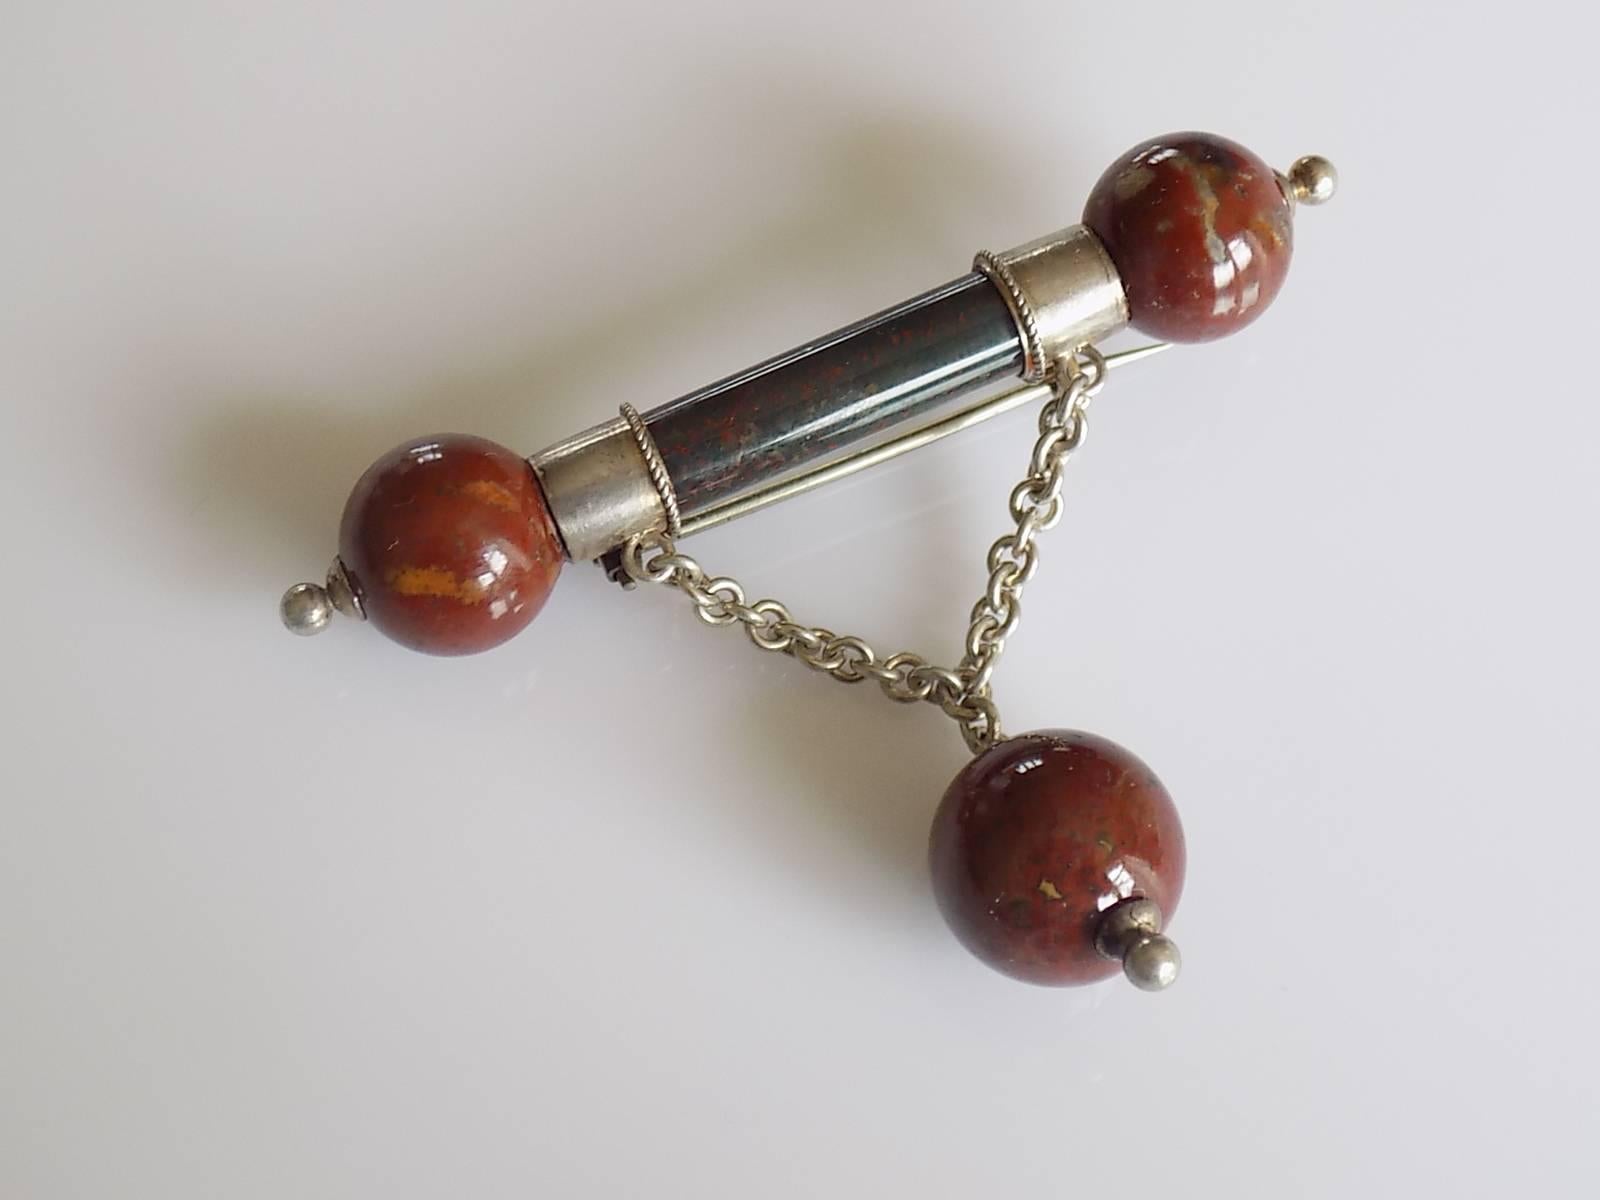 A Stunning Victorian c.1880 high polished Scottish Bloodstone agate and Bloody Agate brooch in solid Silver. 
The brooch attract by a large size, quality and striking modern look. 
Unique, rare pieces of jewellery and a beautiful complement to any